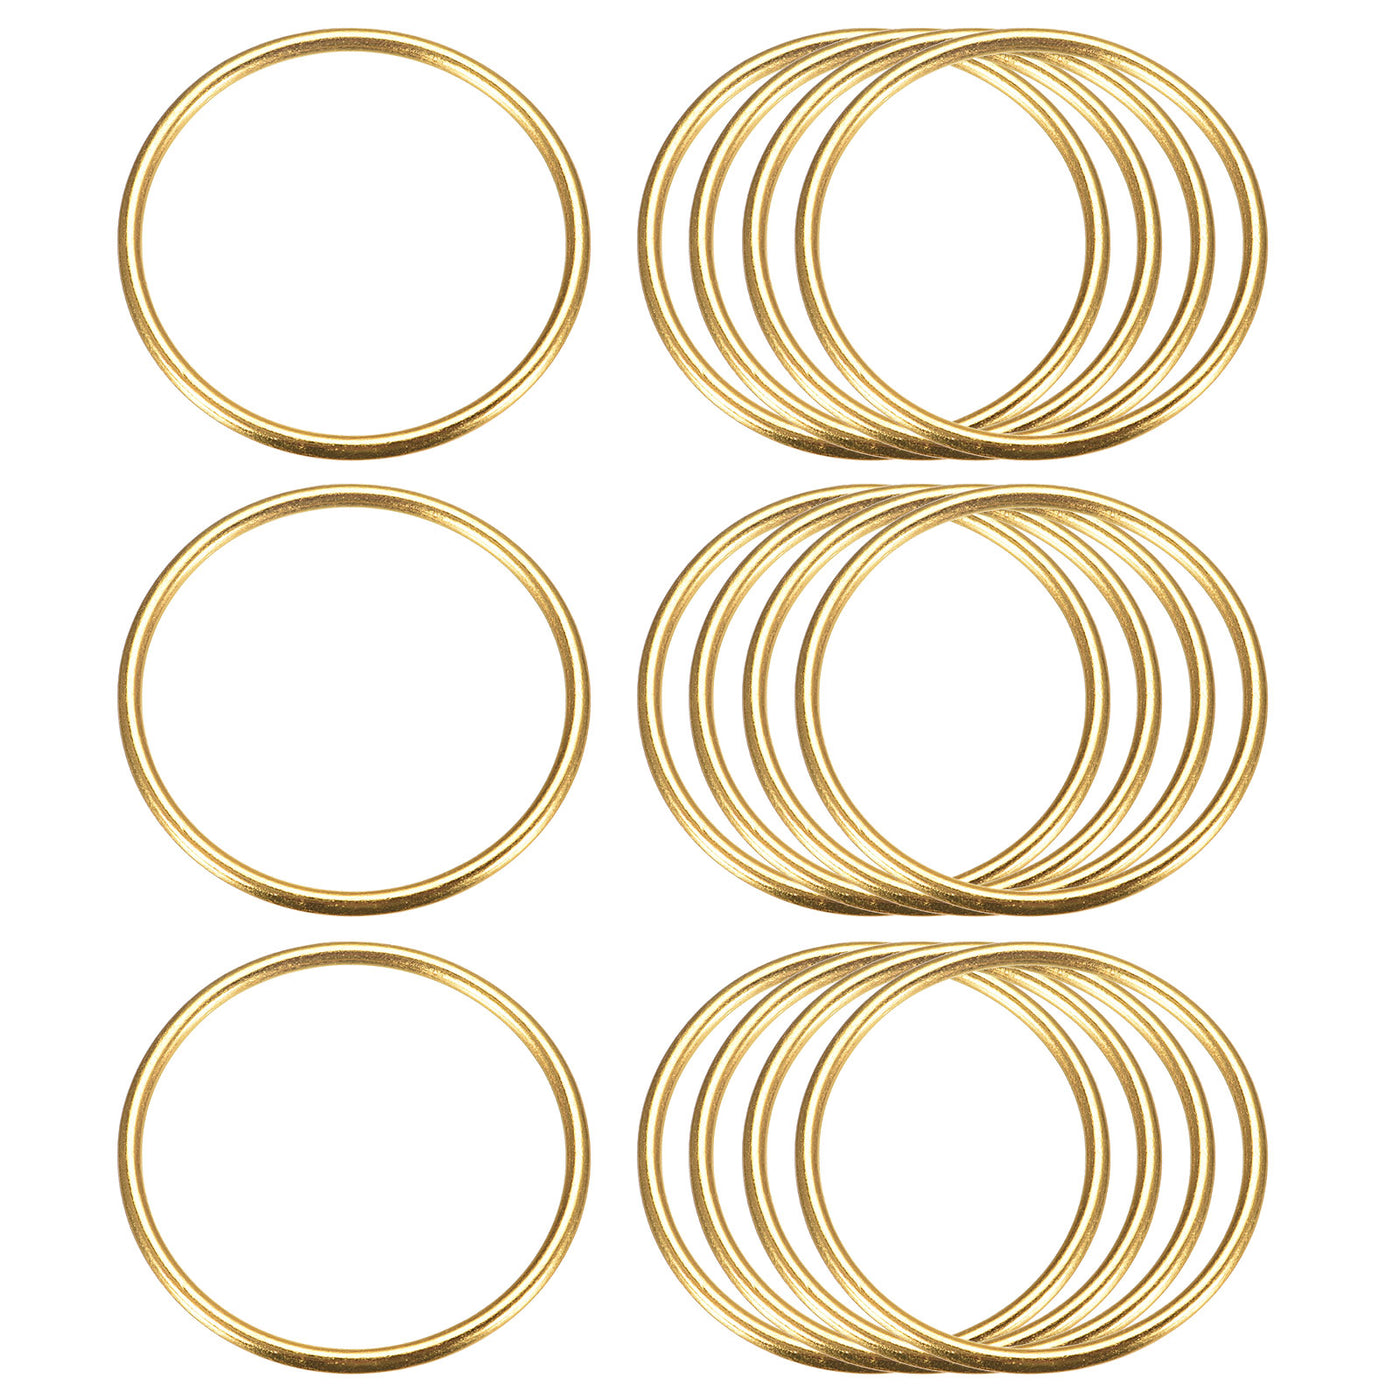 uxcell Uxcell Metal O Rings, 15pcs 50mm(1.97") ID 3mm Thick Welded O-Ringe, Gold Tone